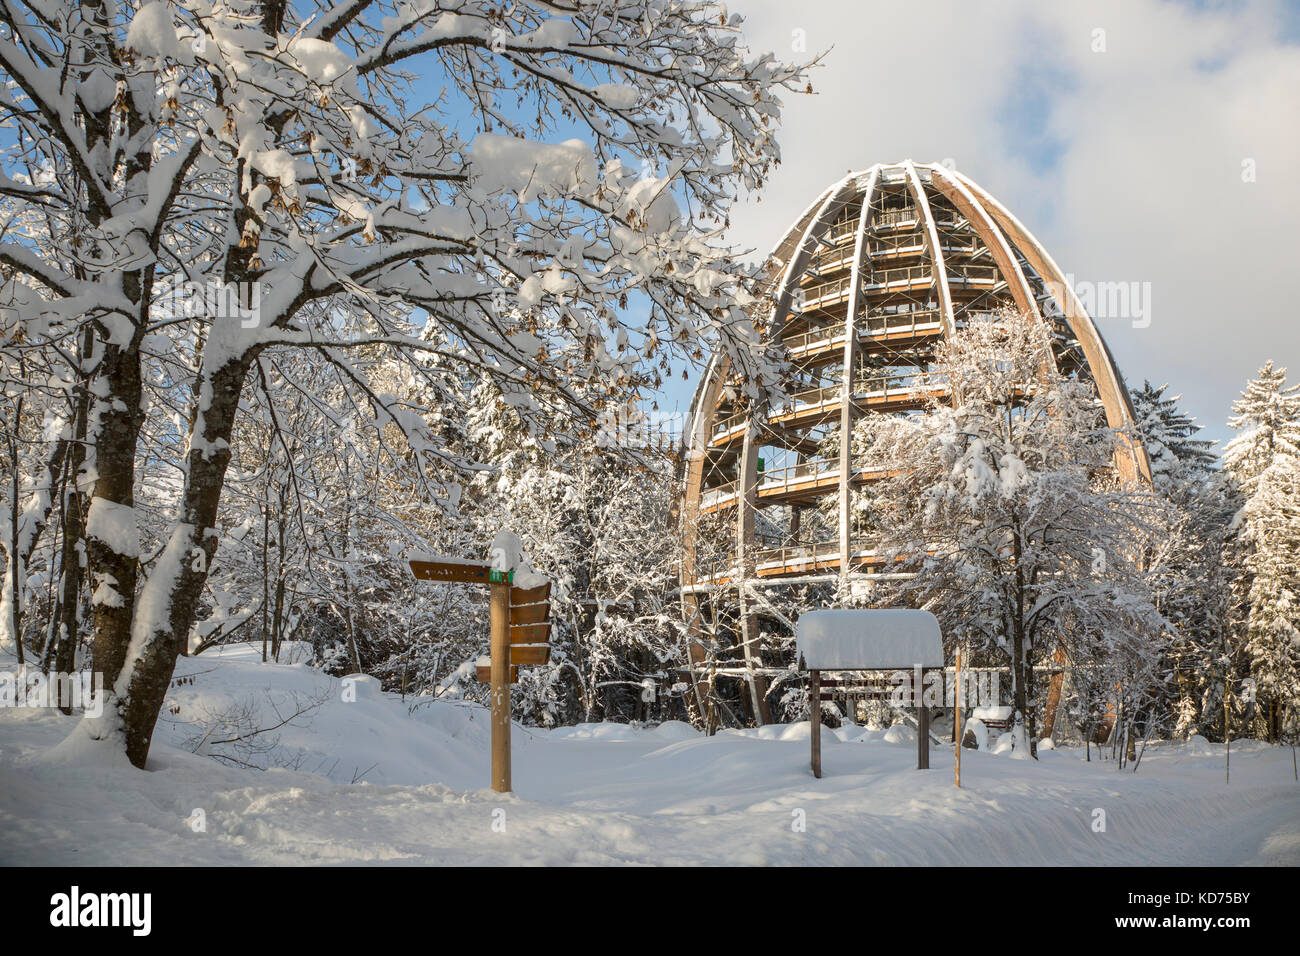 Baumwipfelpfad in winter, wooden tower construction of the world´s longest tree top walk in the Bavarian Forest National Park, Germany Stock Photo